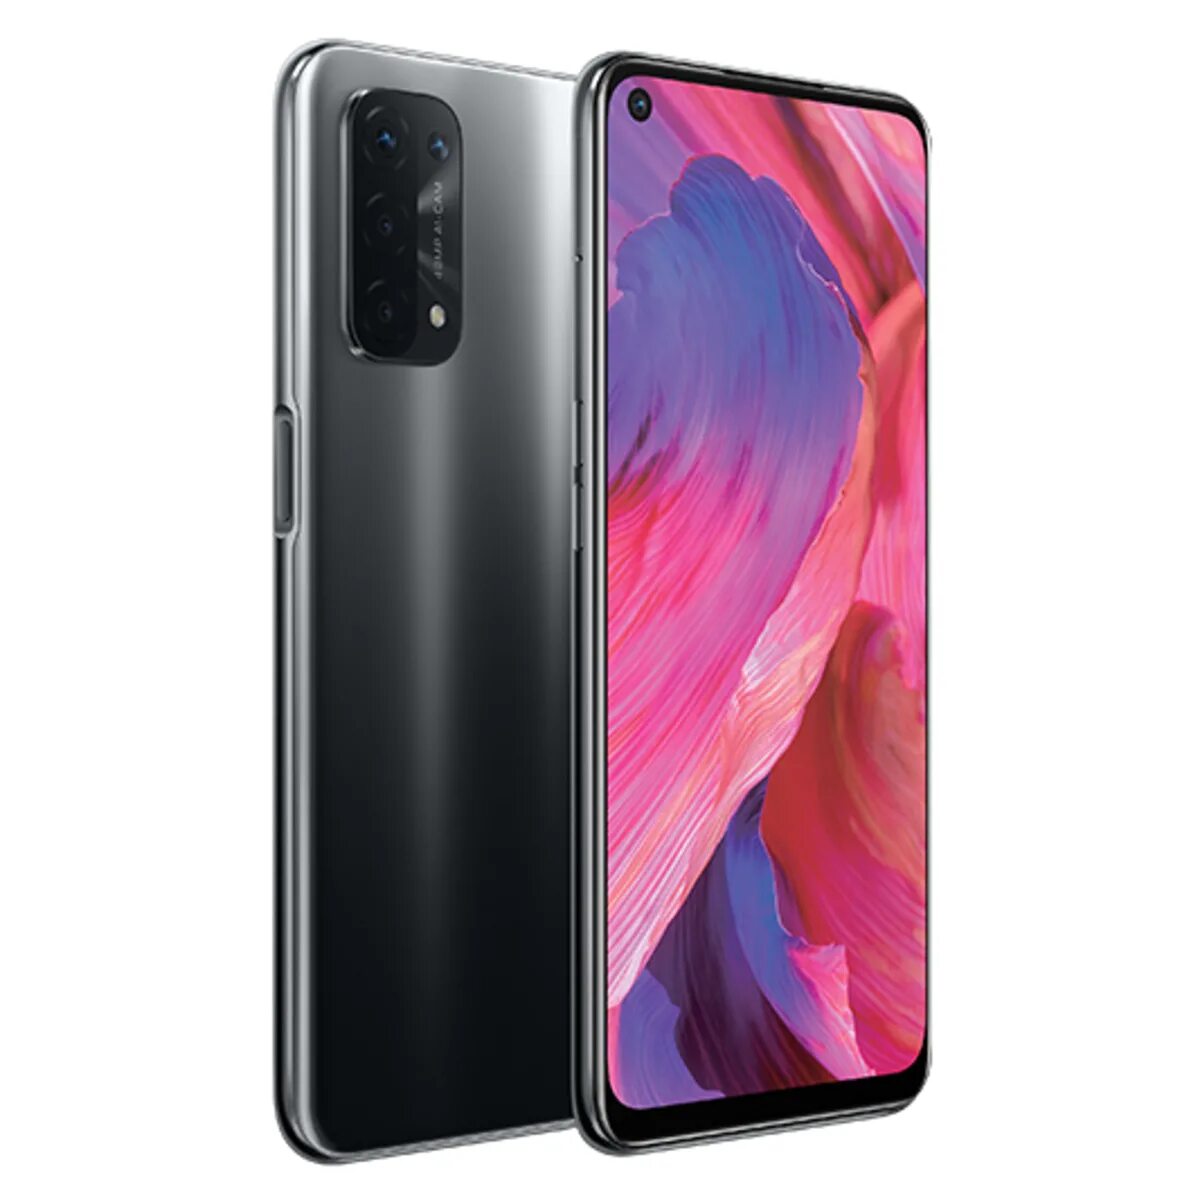 Oppo a78 8 128. Oppo a74. Oppo a74 4/128gb. Смартфон Oppo a74 4/128 GB Prism Black. Оппо а74 5g.